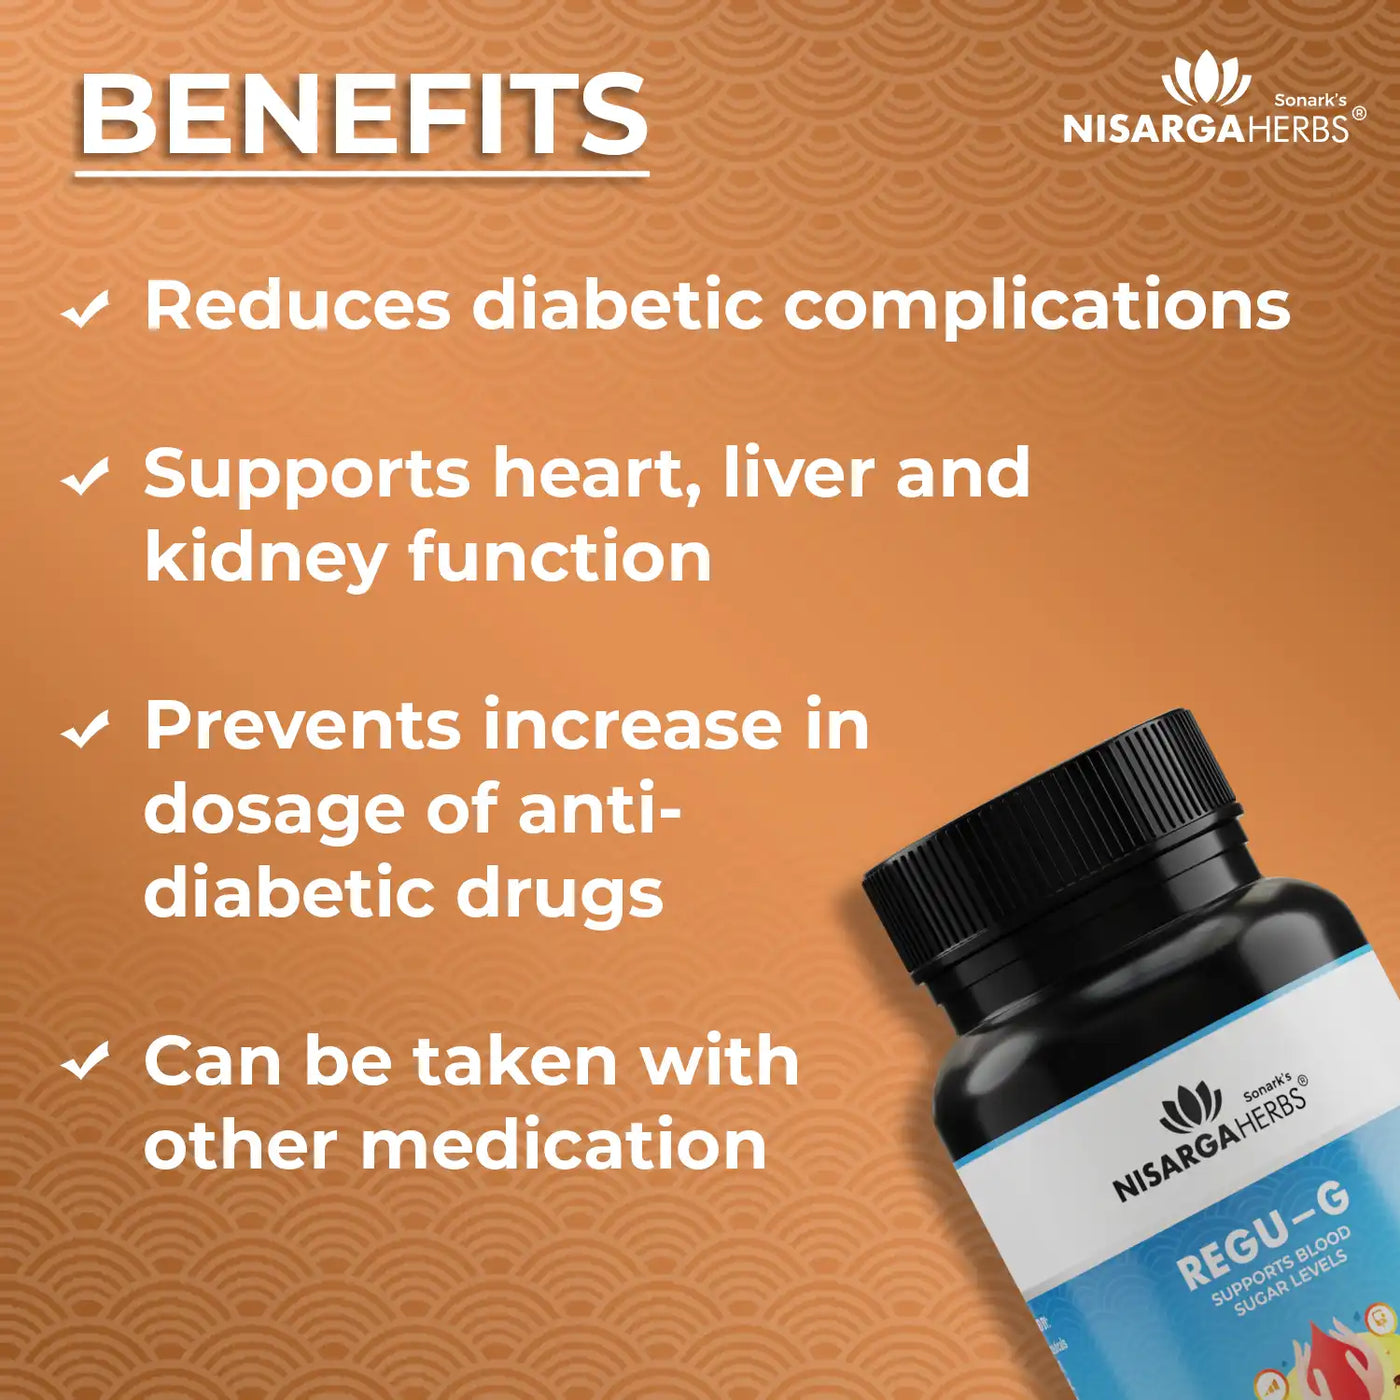 regu-g reduces diabetic complications, supports vital organ function, prevents increase in dosage of anti diabetic drugs. 